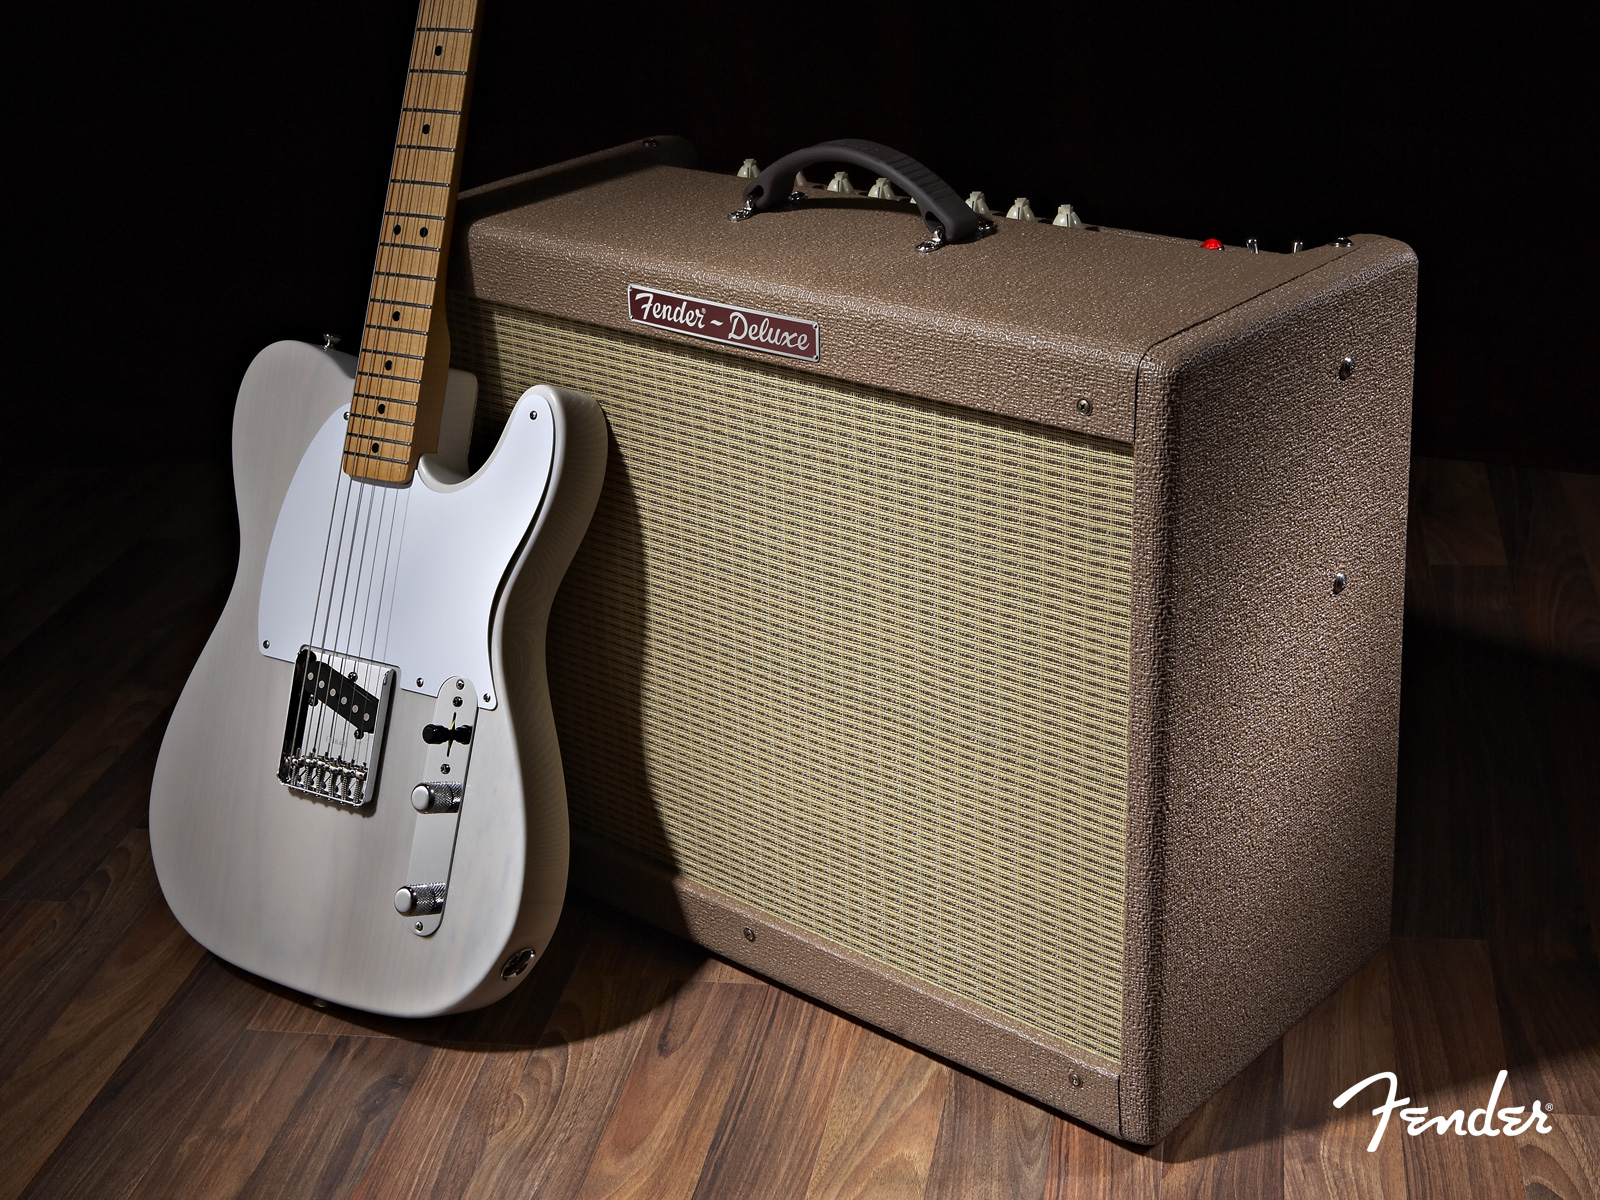 Free Download Picture Of Fender Telecaster Guitar And Amplifier